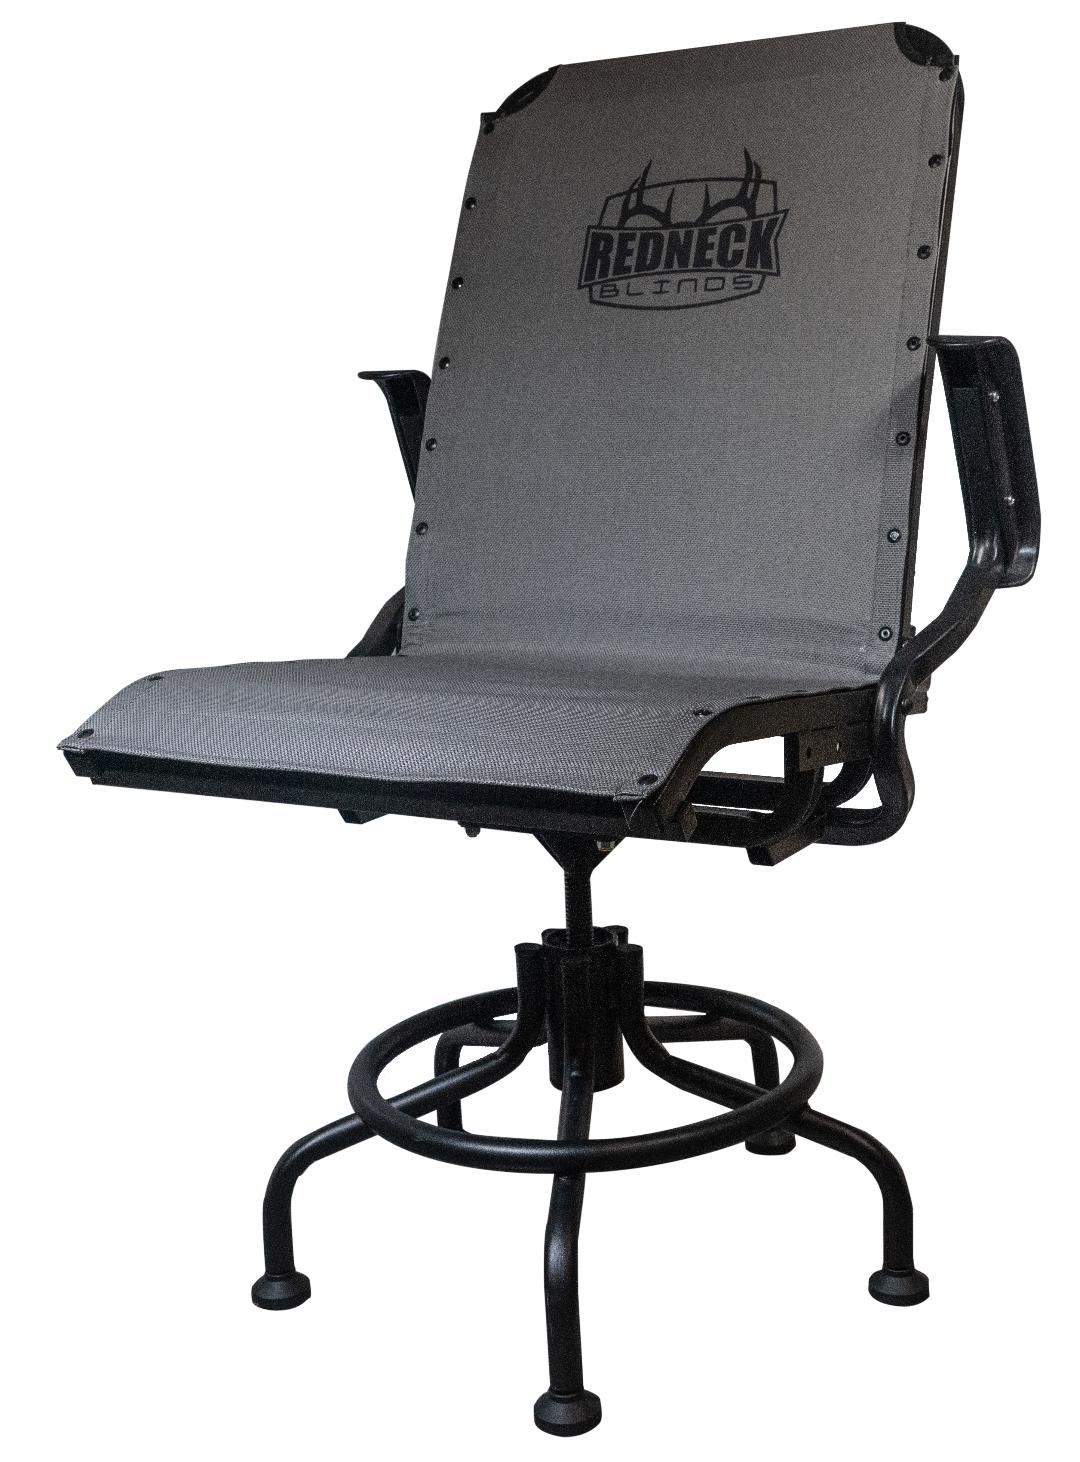 Redneck Platinum 360 Hunting Chair 18 New Treestands and Blinds for 2022